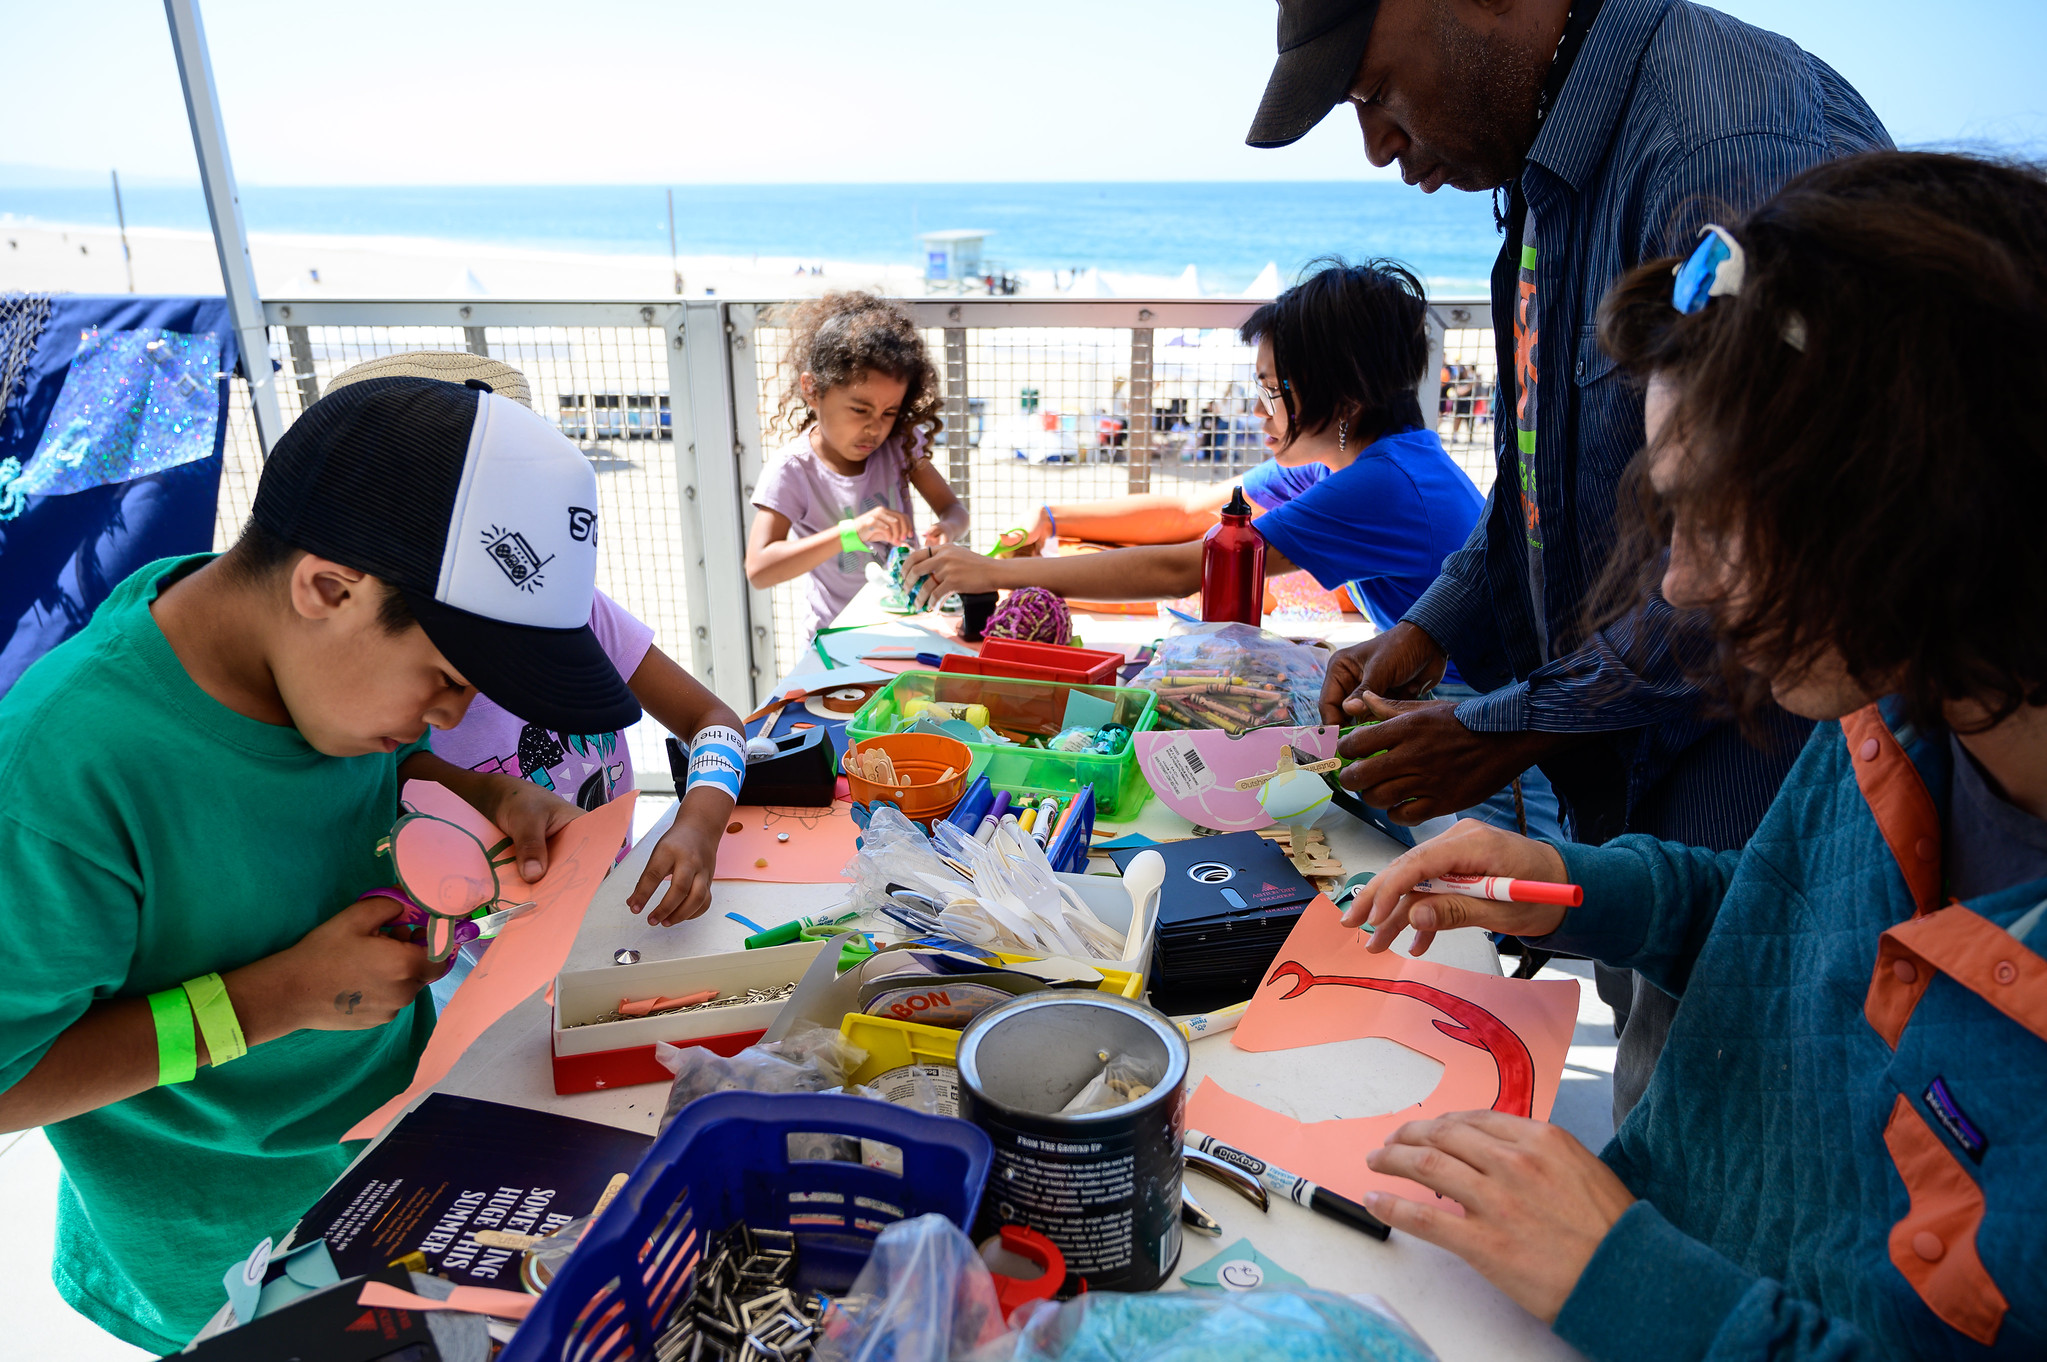 Coastal Cleanup Day at Dockweiler Youth Center.  Photo by Venice Paparazzi